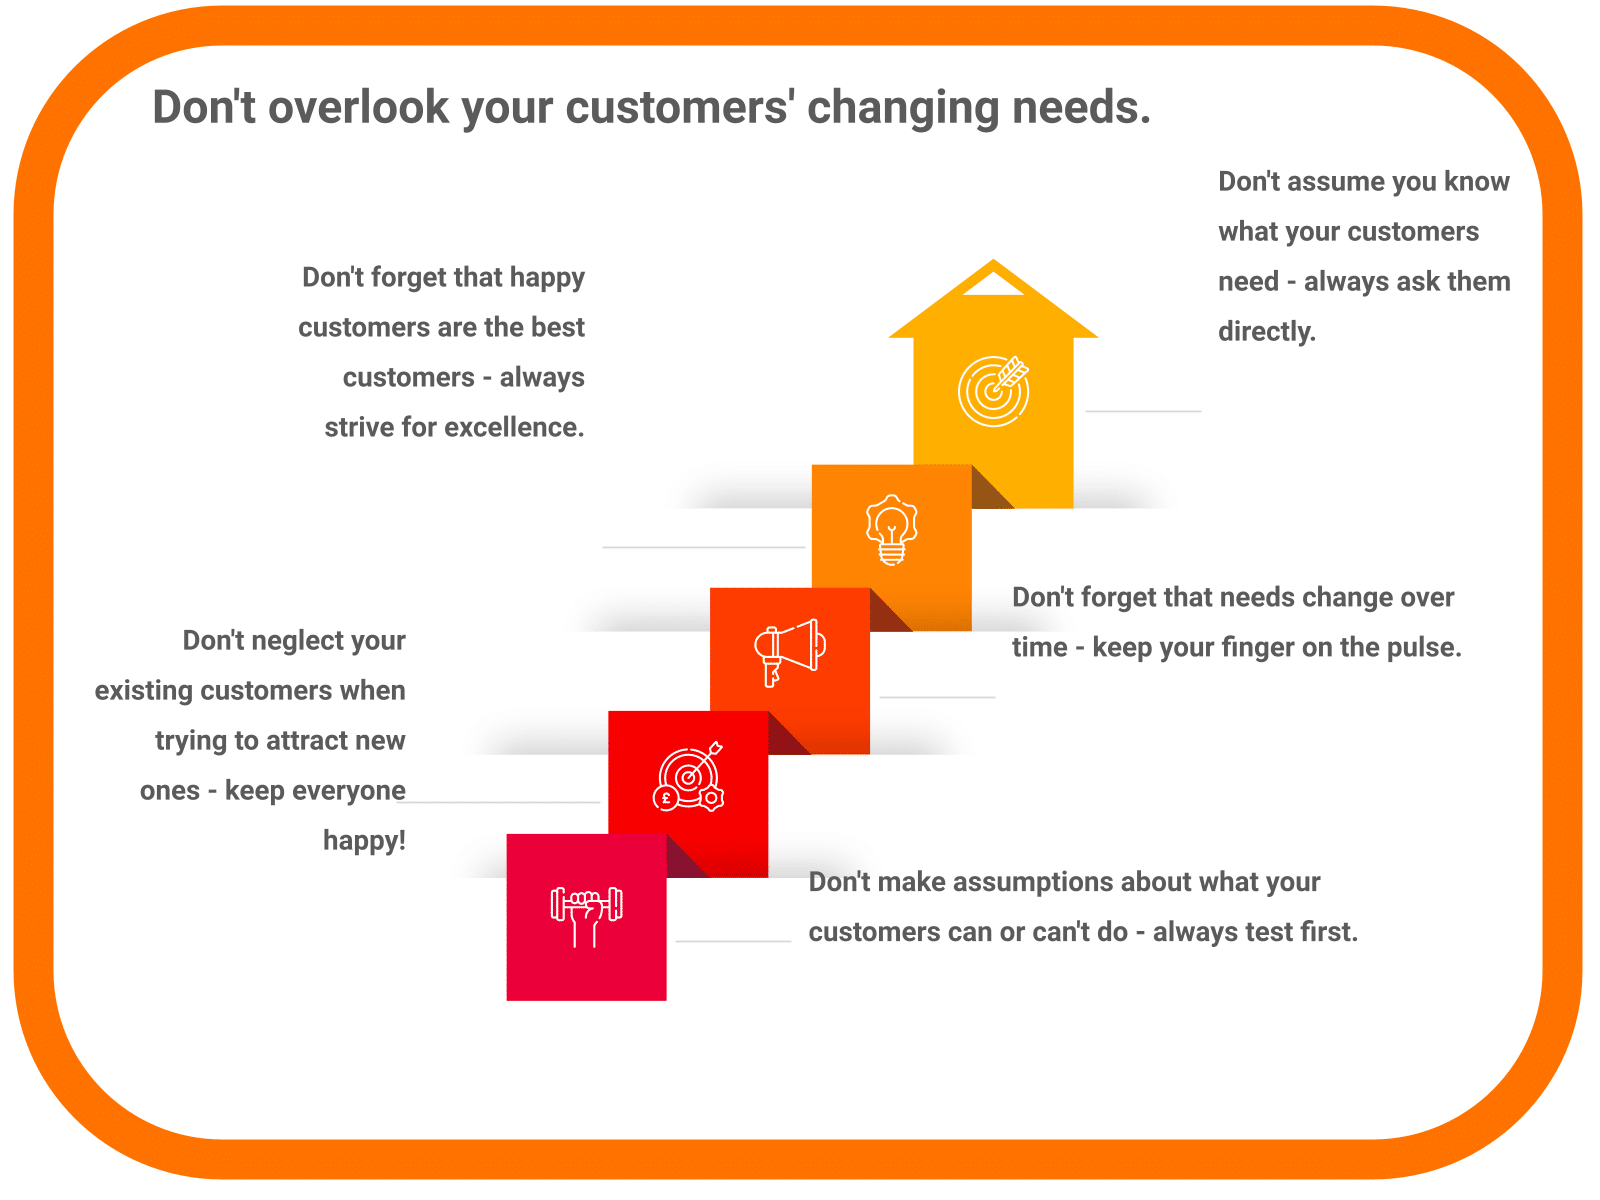 Don’t overlook your customers’ changing needs.